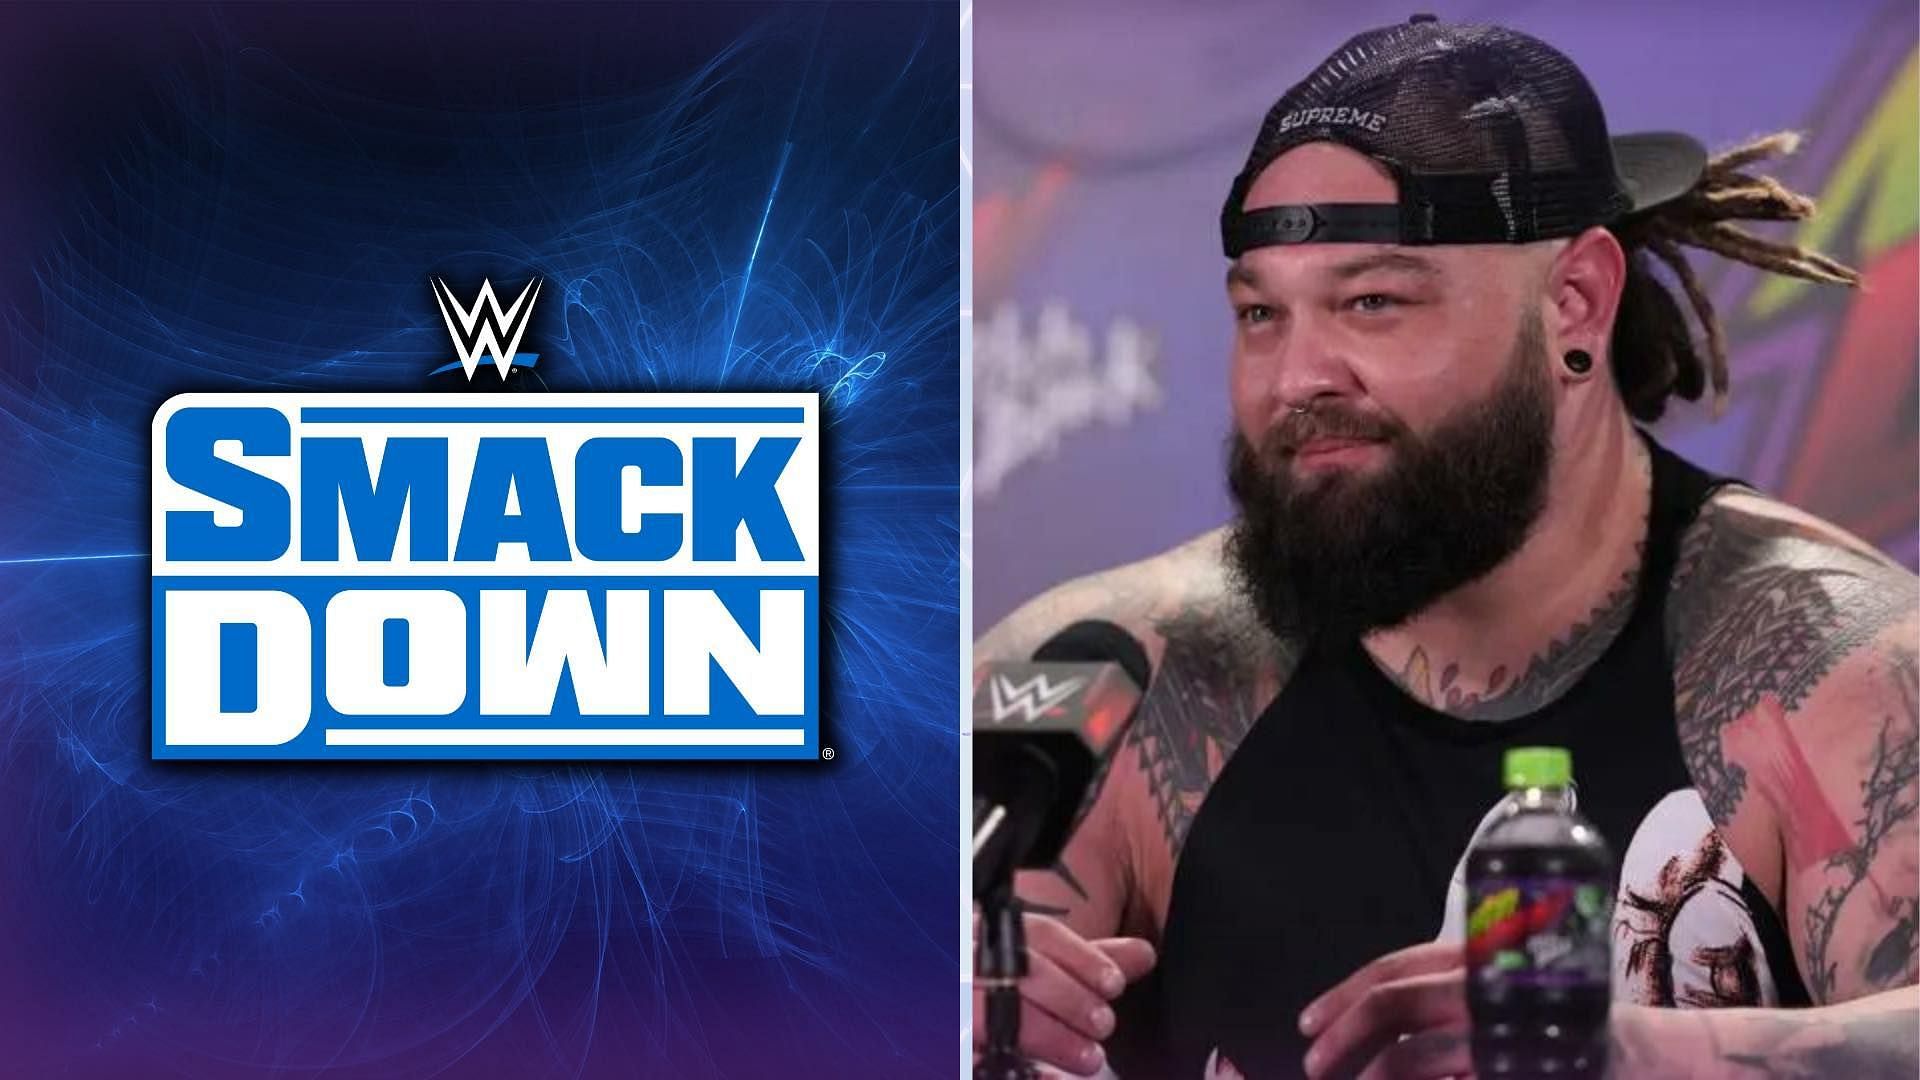 Several stars could pay tribute to Bray Wyatt on WWE SmackDown